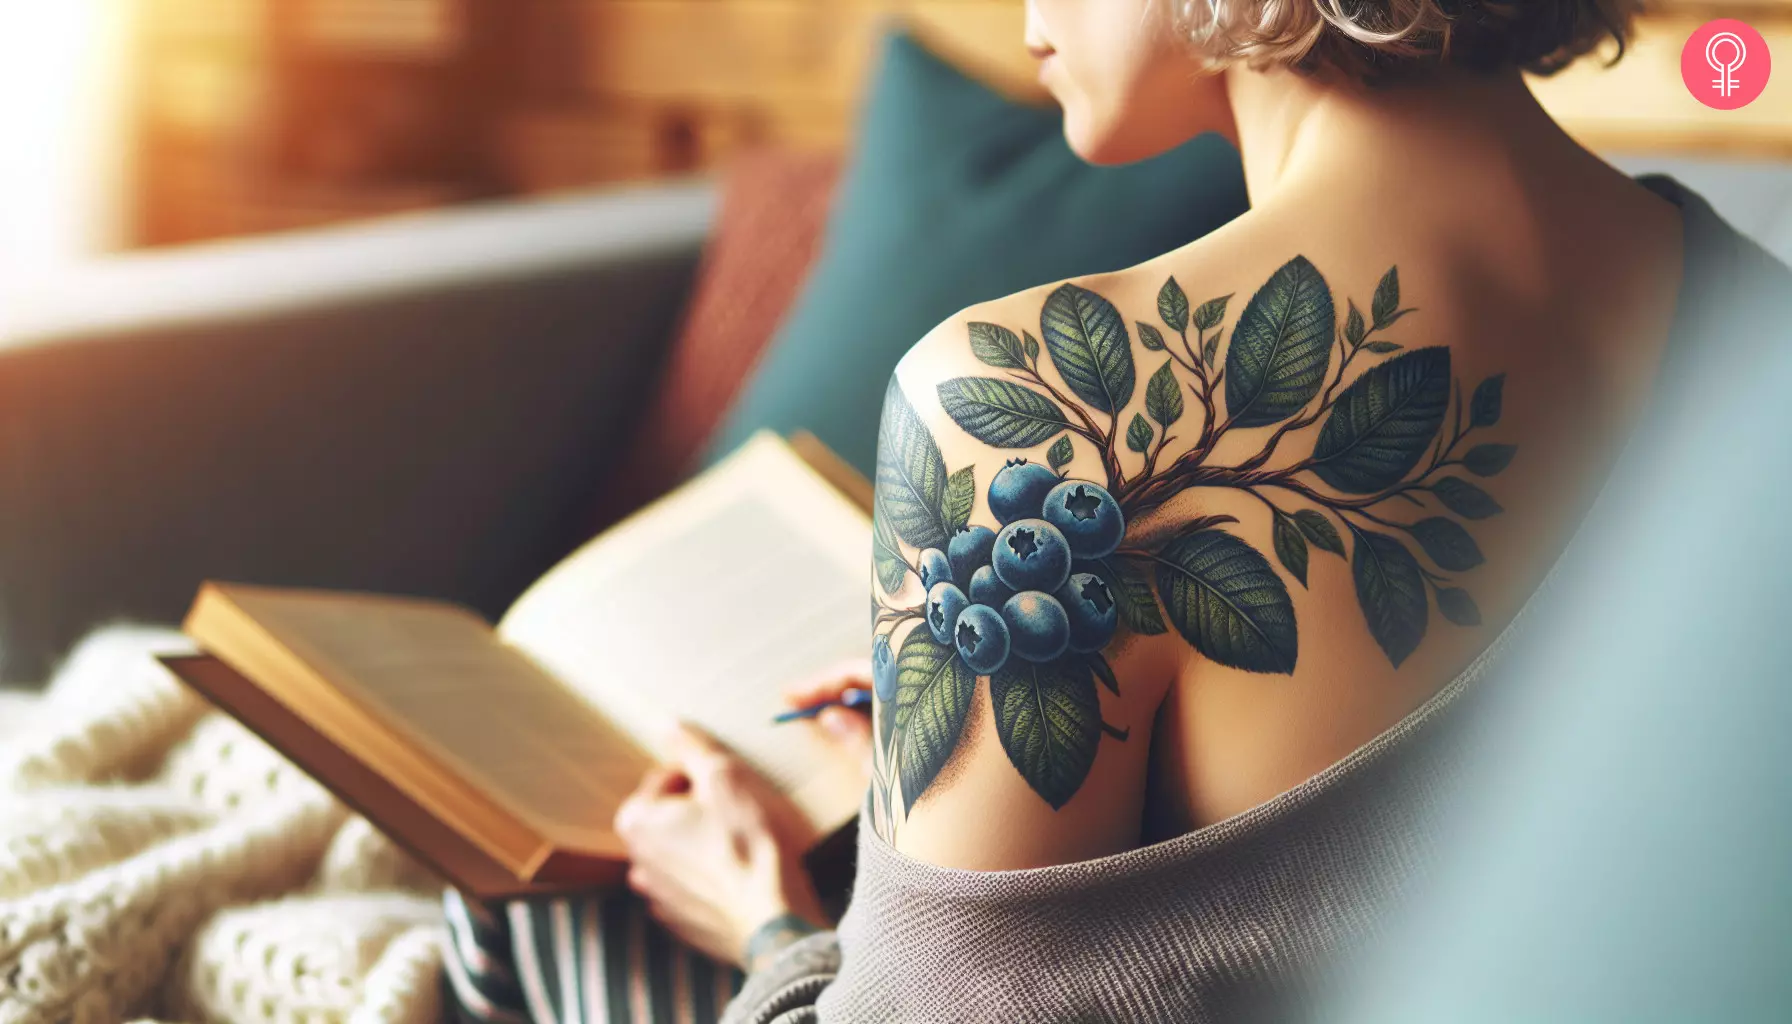 A blueberry vine tattoo over the shoulder of a woman